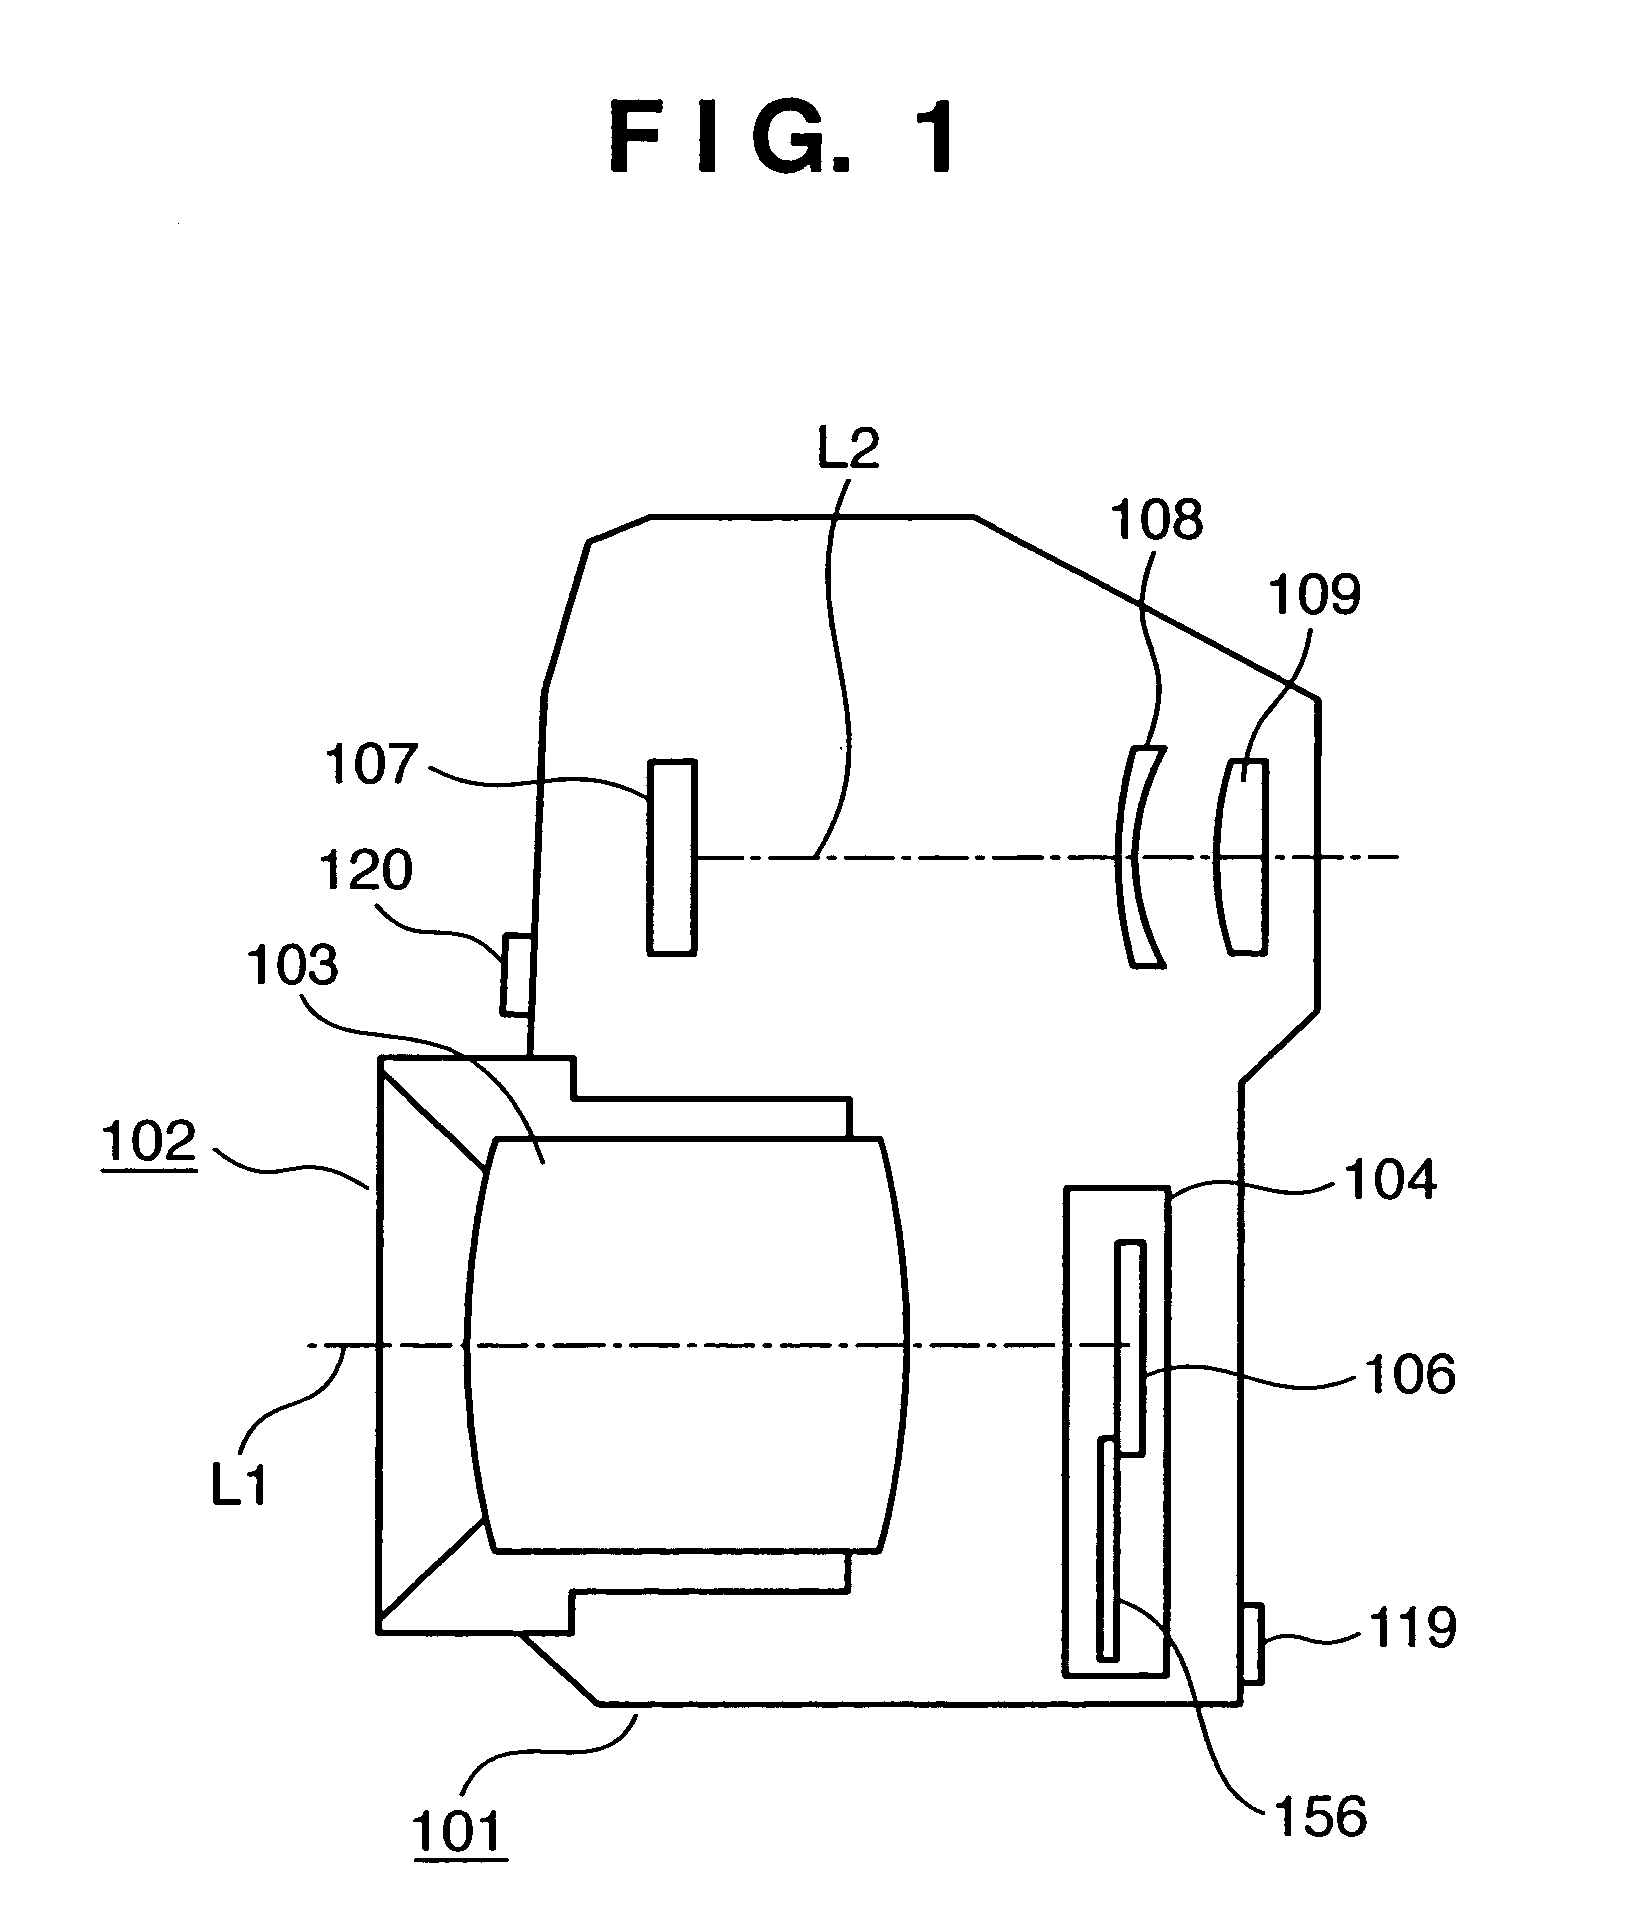 Image sensing apparatus having image signals generated from light between optical elements of an optical element array